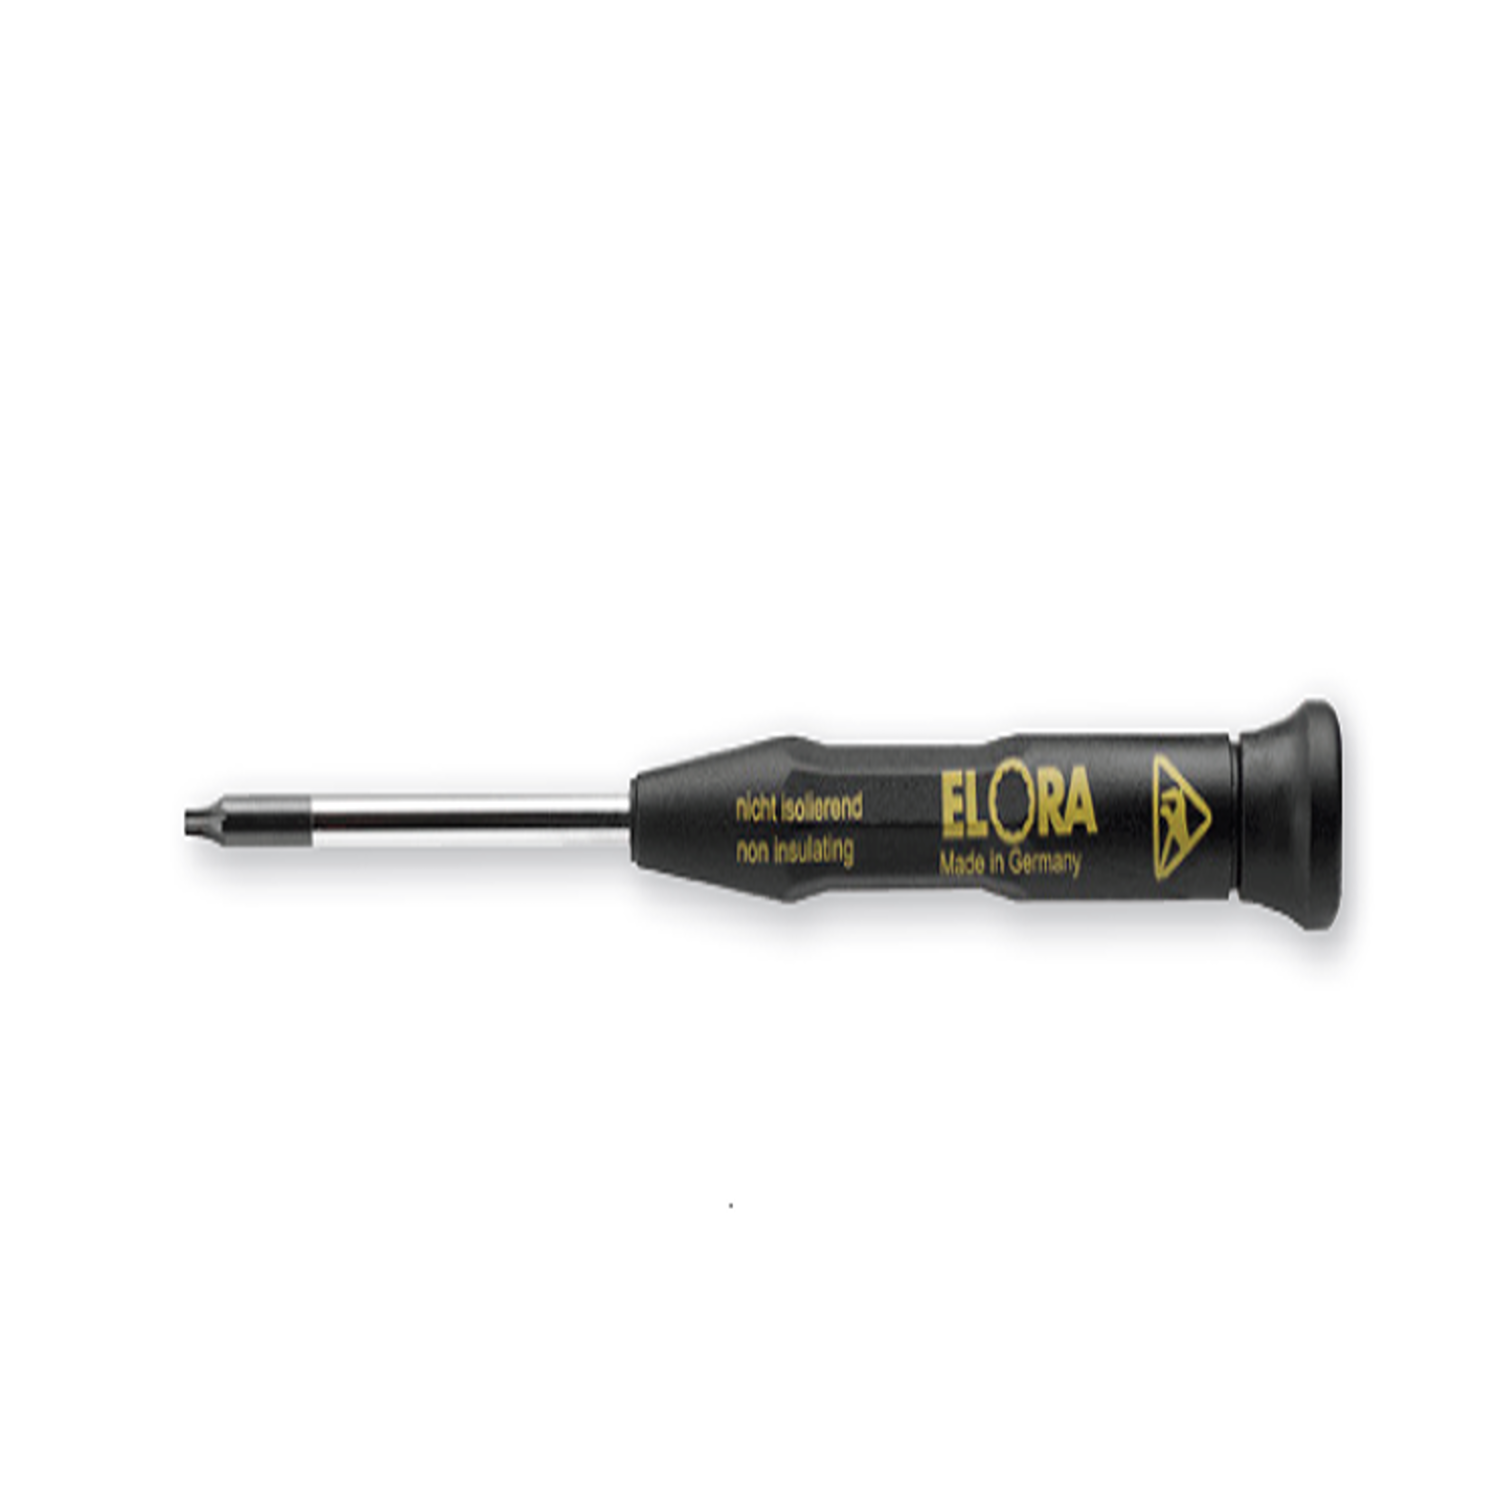 ELORA 620-TTX ESD Electronic Screwdriver ESD (ELORA Tools) - Premium Screwdriver from ELORA - Shop now at Yew Aik.